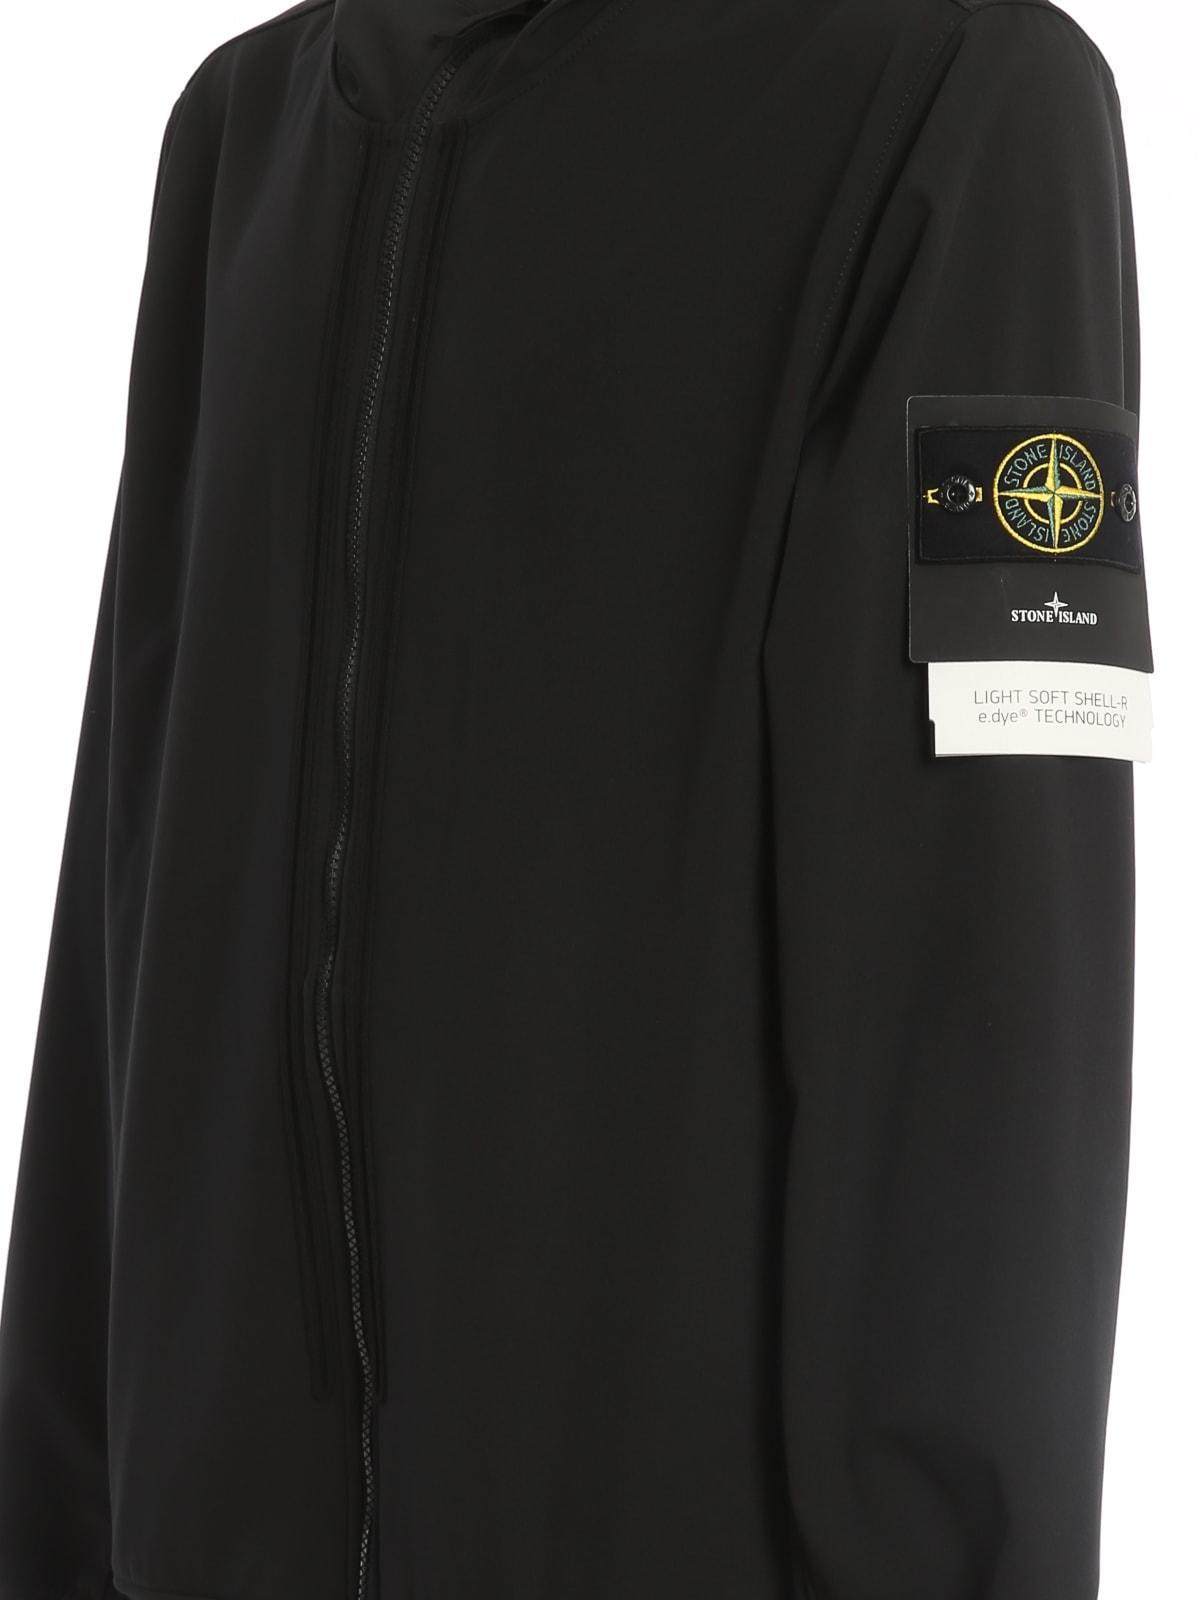 Stone Island Soft Shell Jacket in Nero (Black) for Men - Save 37% | Lyst